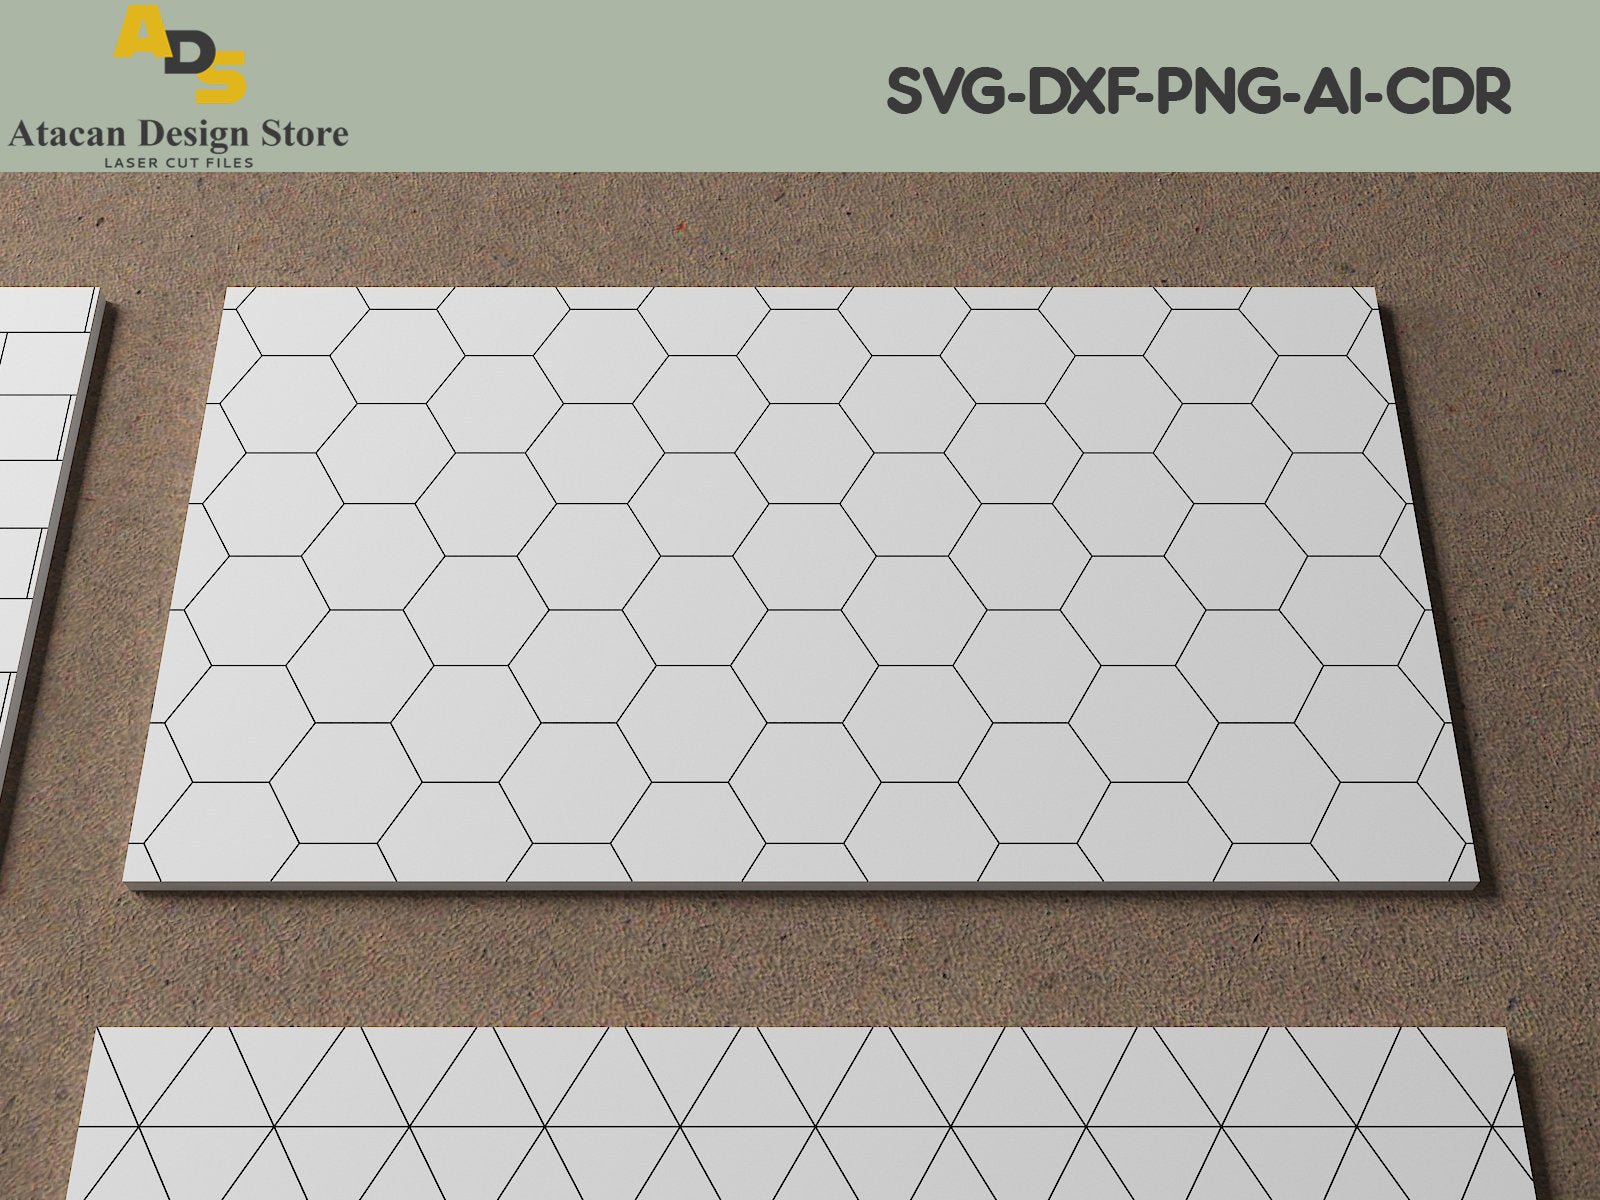 Laser cut Patterned Panel Files / Simple Panel Patterns / Vector Cutting Files 259